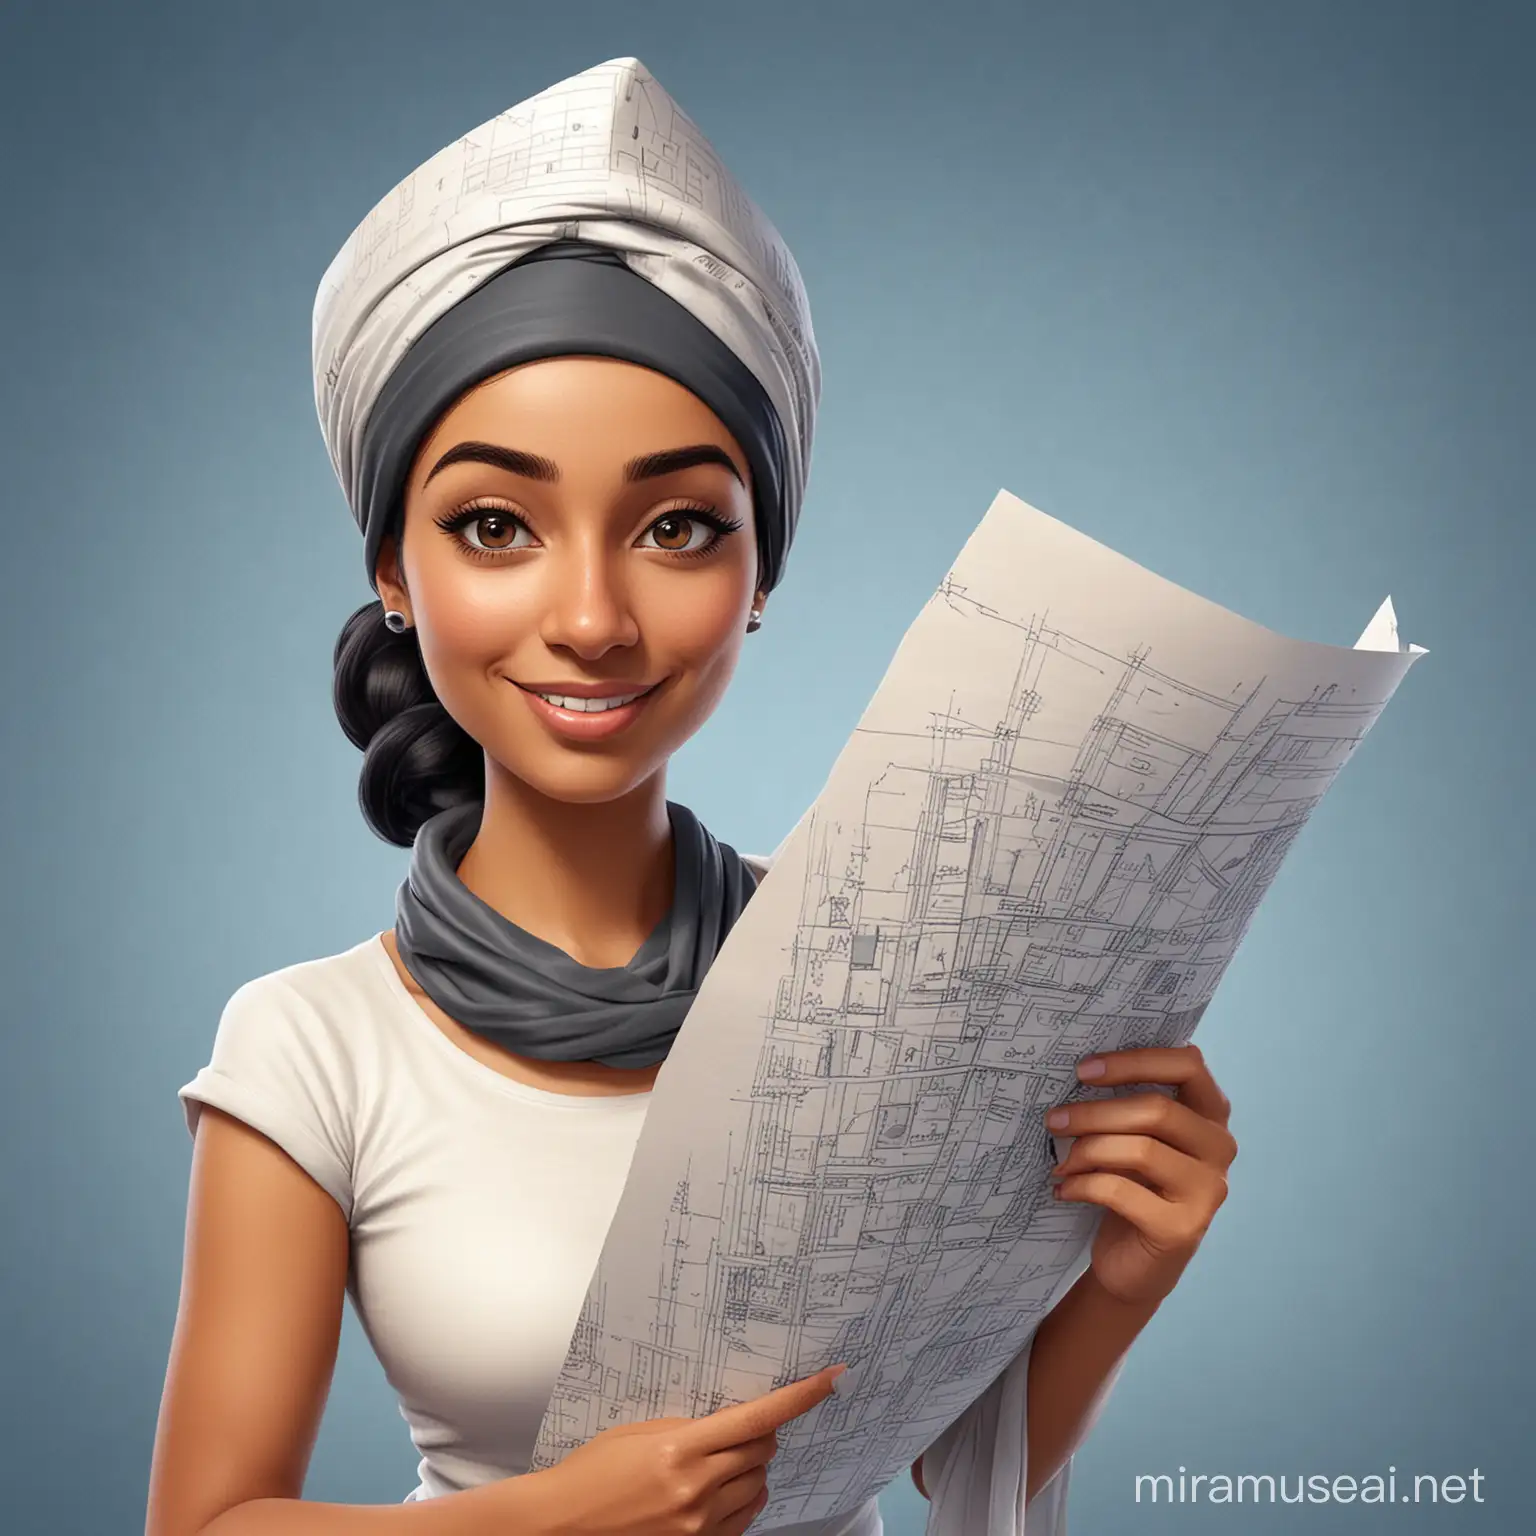 This is a caricature of a beautiful young woman of Egyptian descent. Wearing a head covering, she is depicted as an architect holding a giant blueprint. The image is full-bodied and depicts the woman in a confident and professional manner. The caricature style adds a touch of fun to the overall design. This image would be perfect for architectural or construction-related projects.